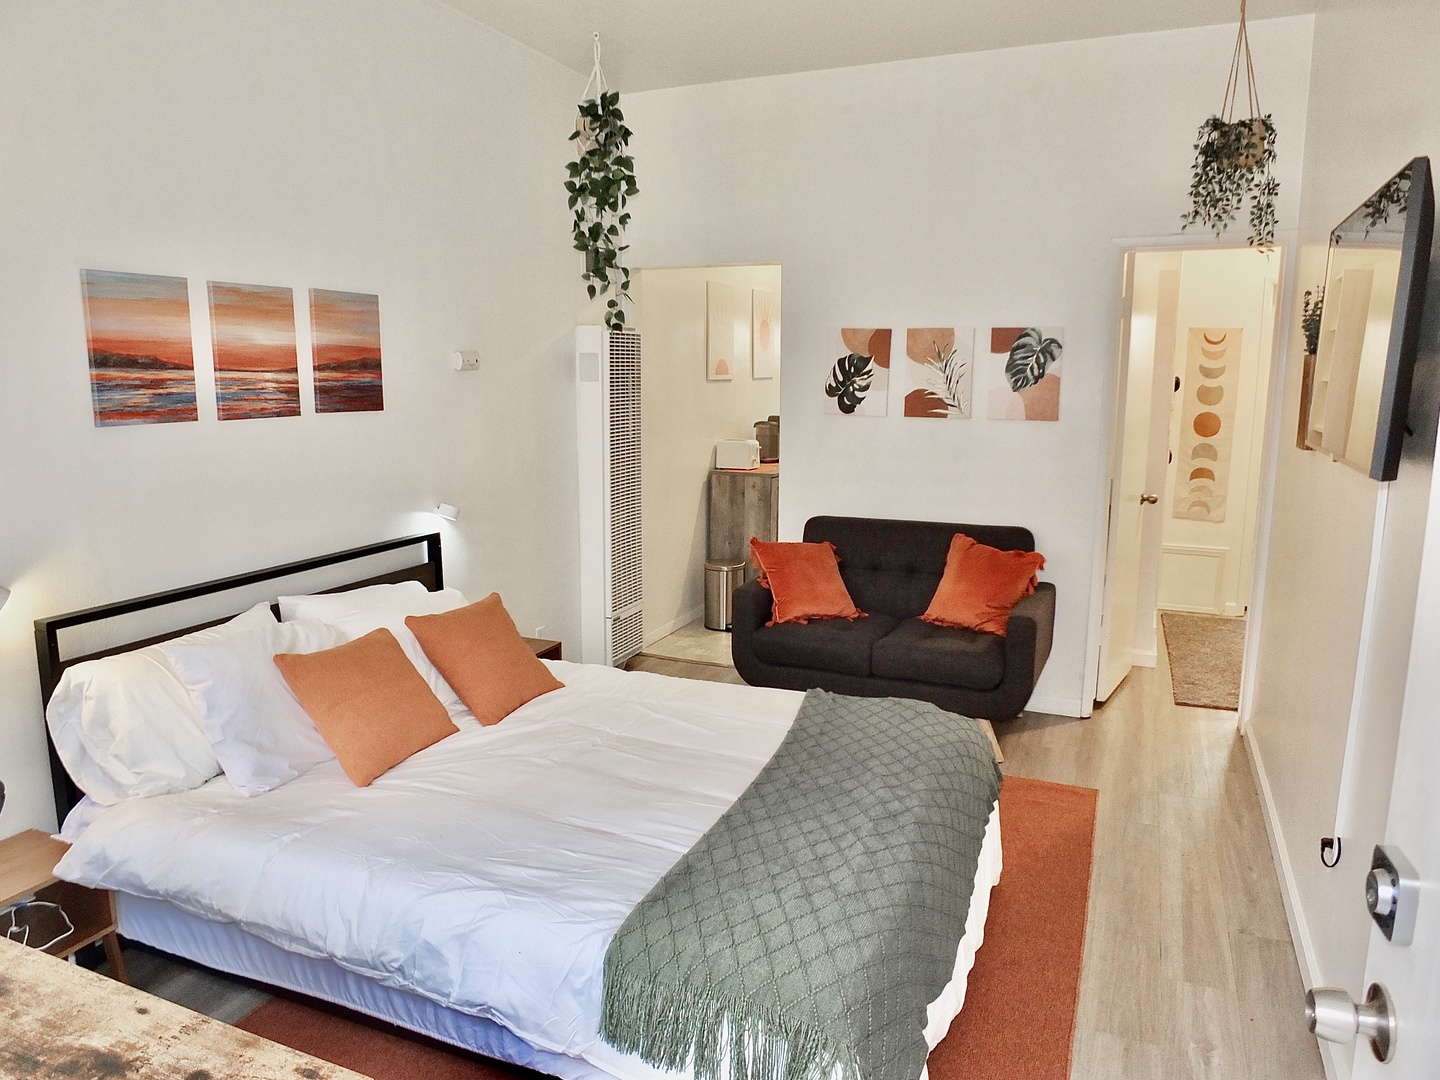 This comfy studio apartment offers a queen bed, Smart TV, & full kitchen